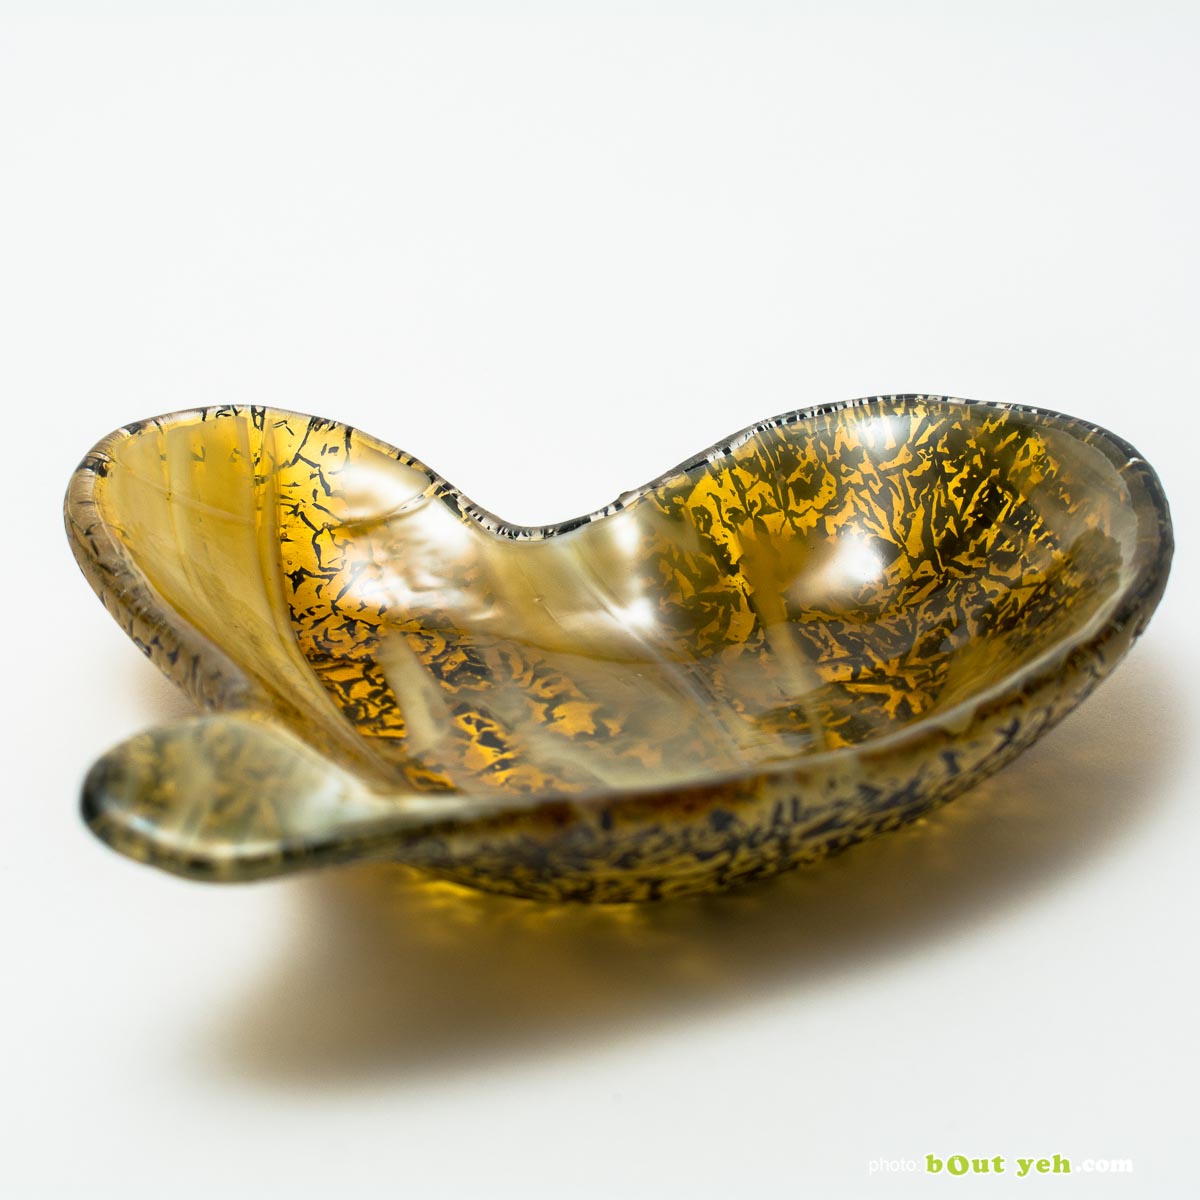 Heart shaped bowl in streaky amber and white by Keith Sheppard Irish glassware - photo 1599